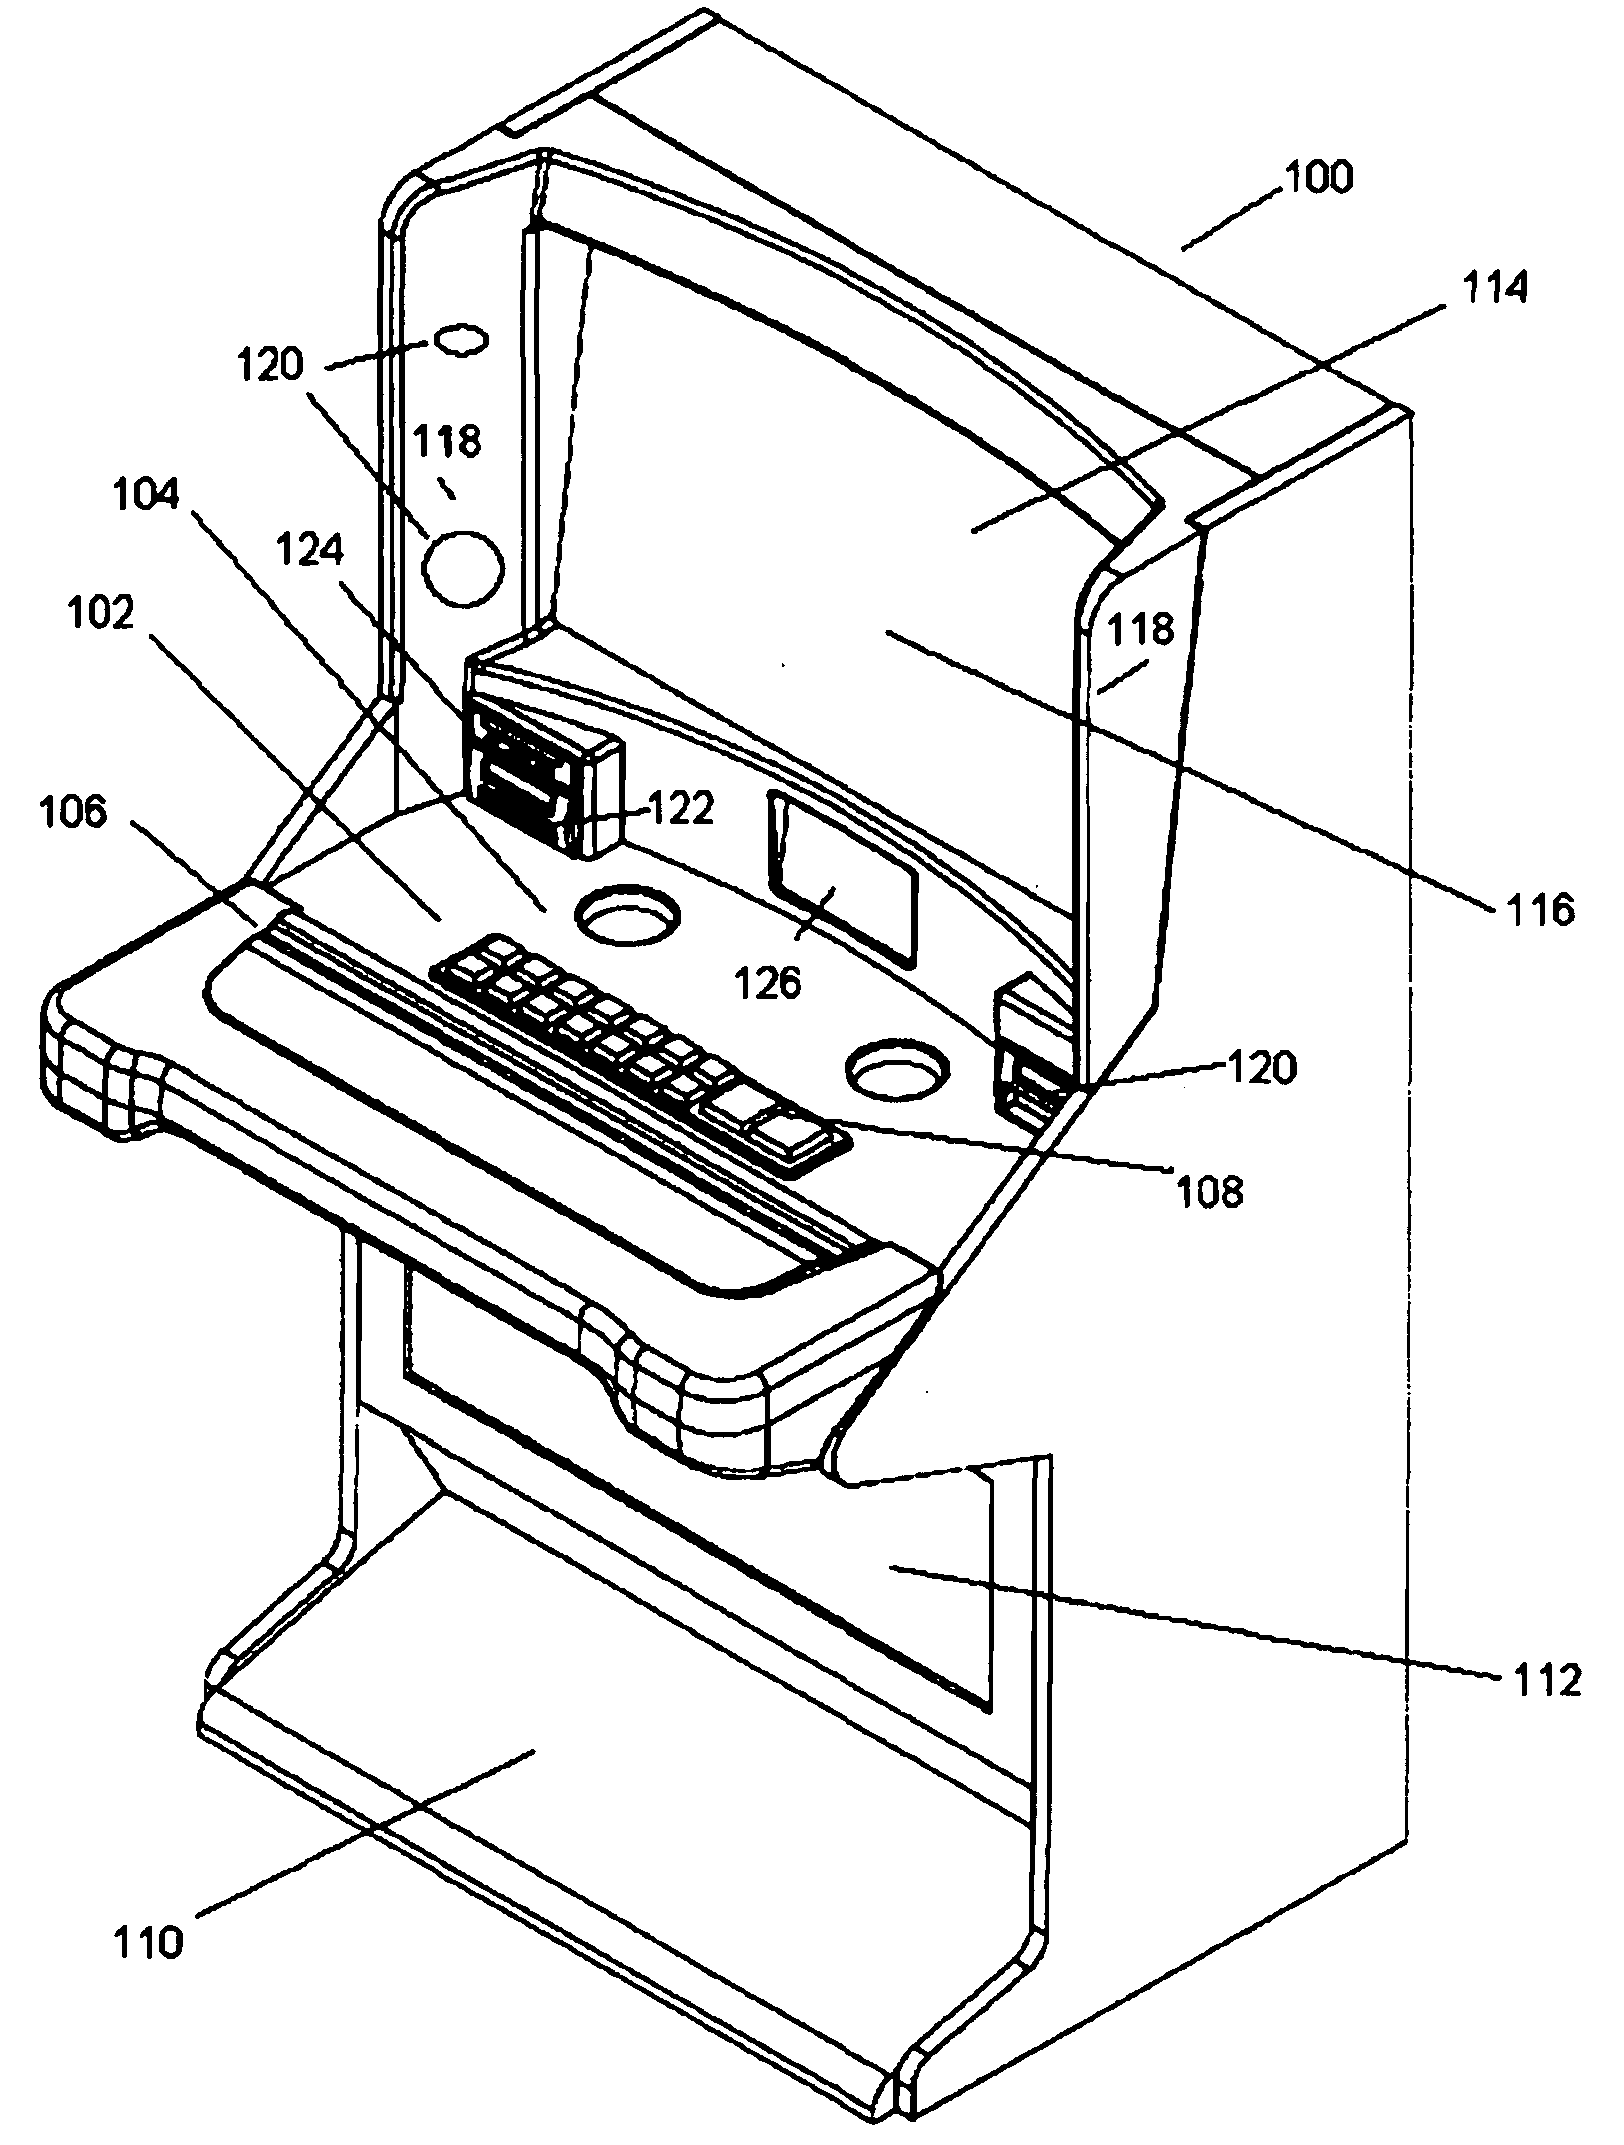 Networked Gaming System With Ergonomic Gaming Machine Having Electromechanical Reels